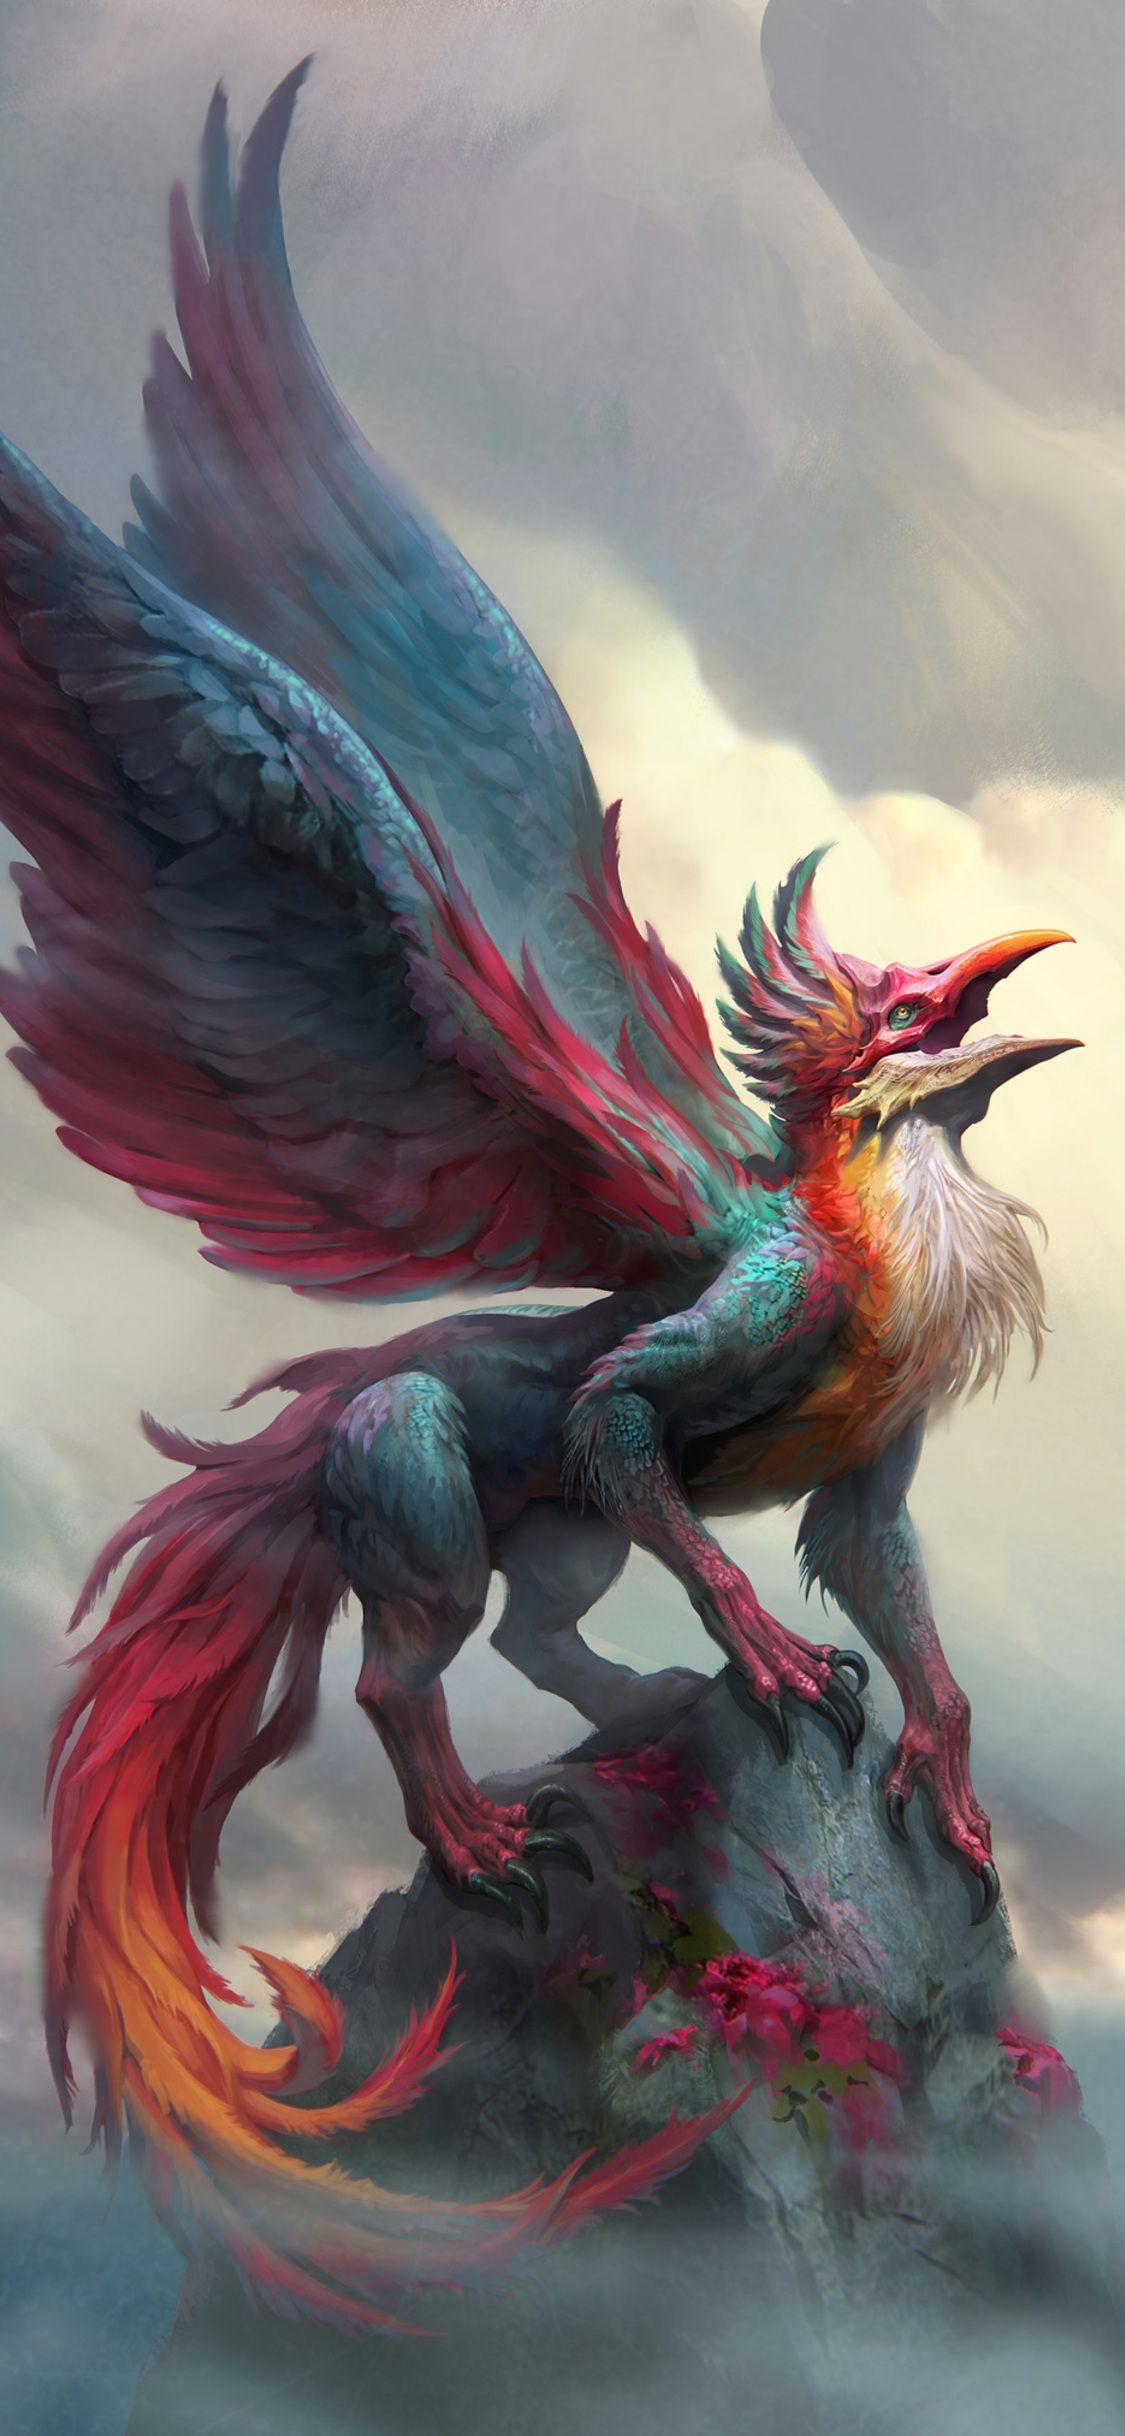 Download Griffin wallpapers for mobile phone free Griffin HD pictures